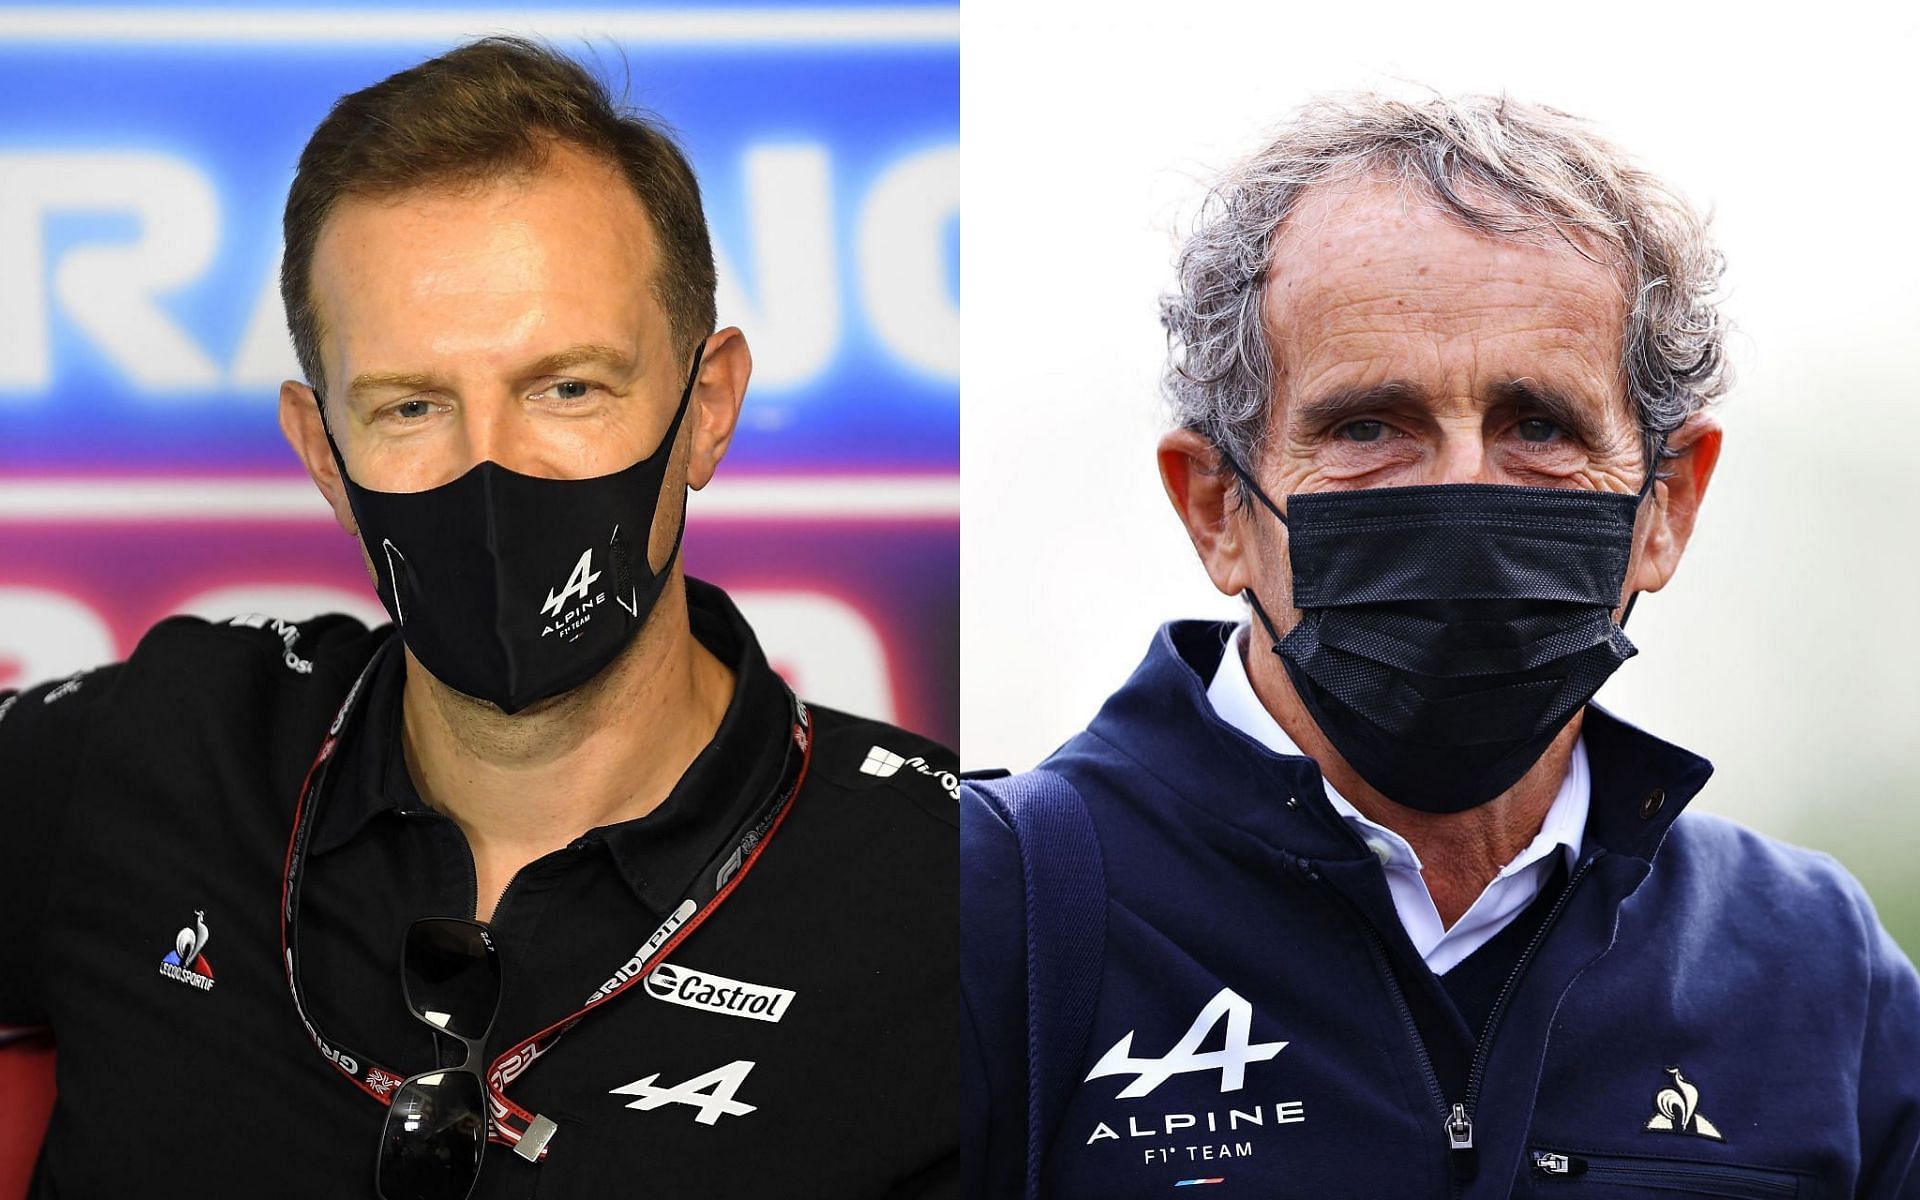 Alain Prost (right) has accused Alpine F1 CEO Laurent Rossi (left) of jealousy